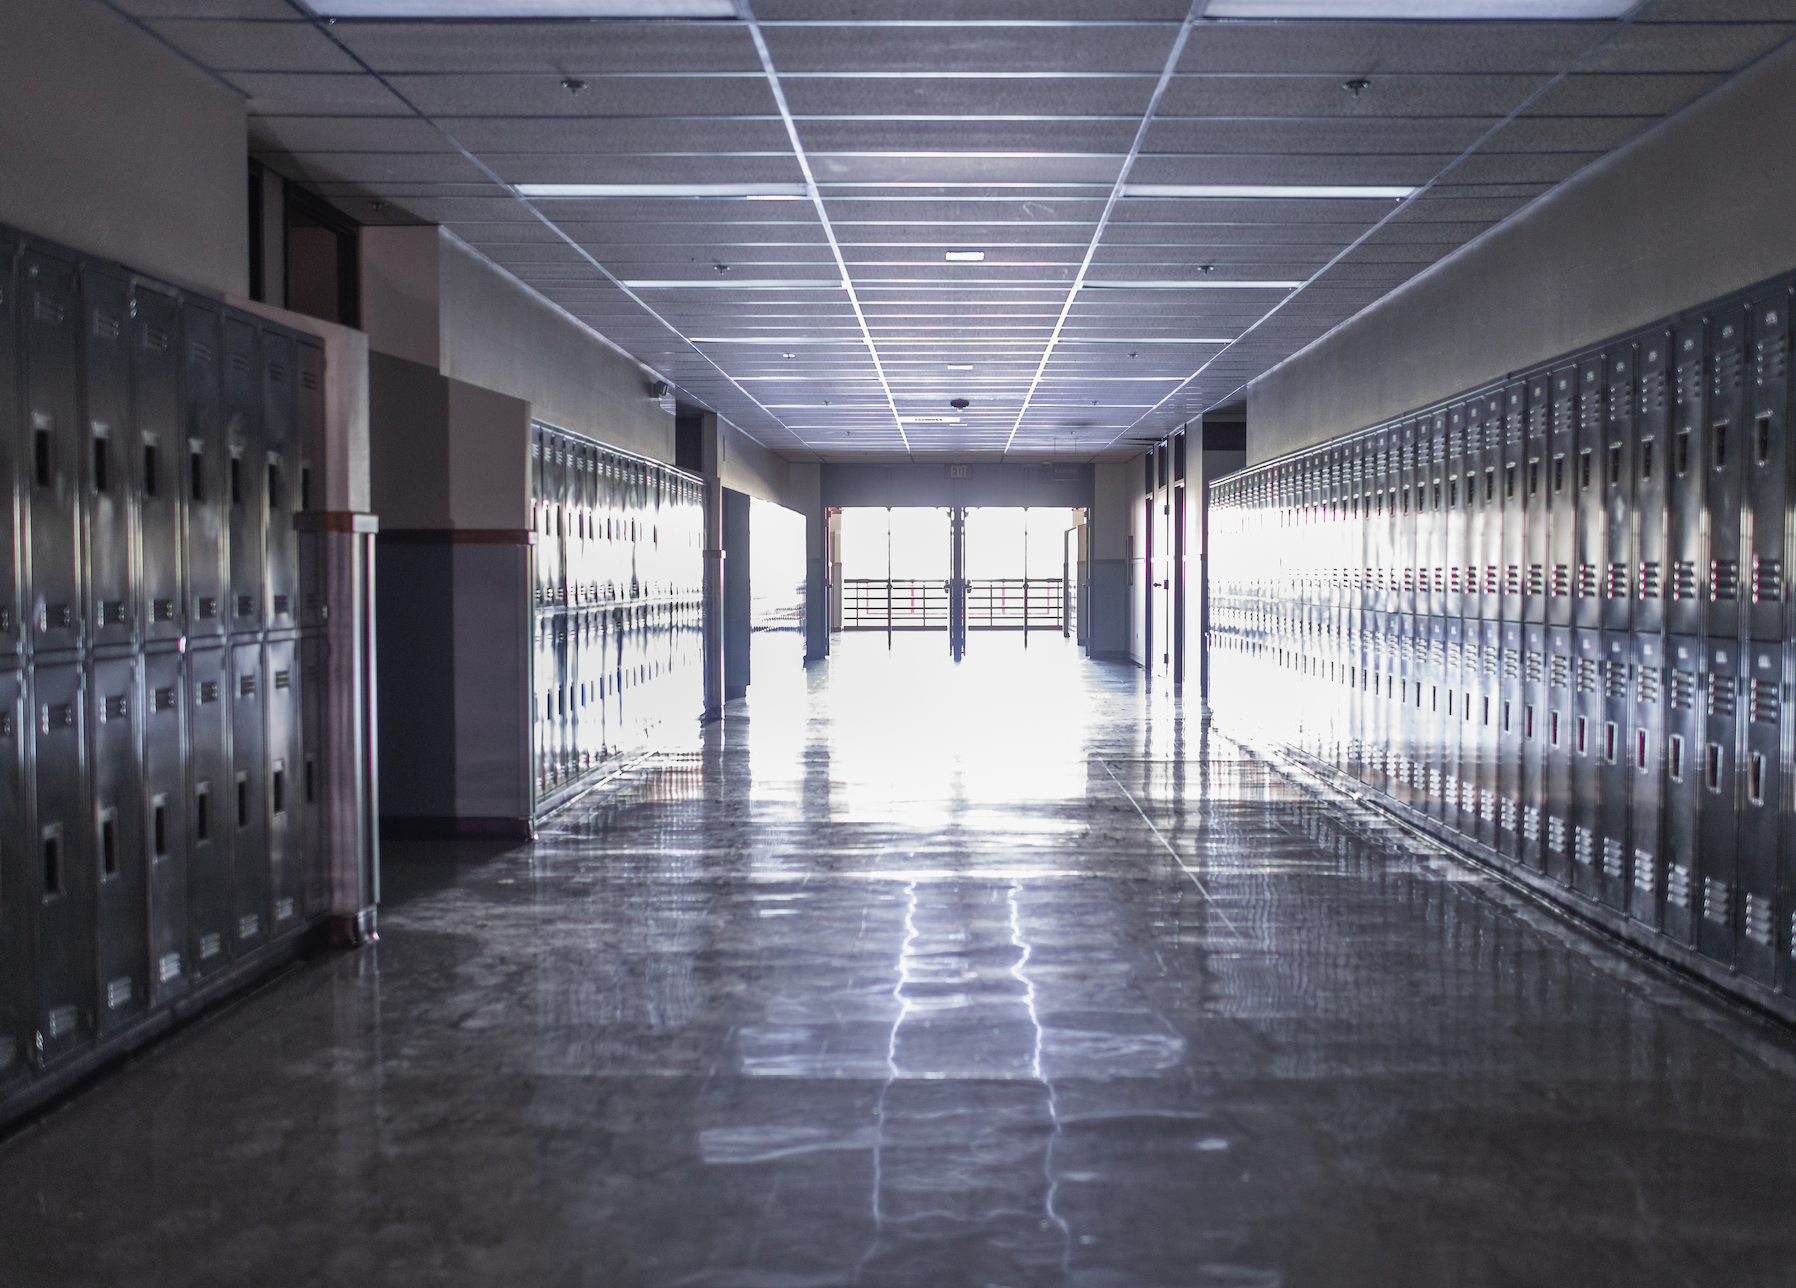 Empty school hallway with rows of lockers on both sides, sunlight streaming in from the end